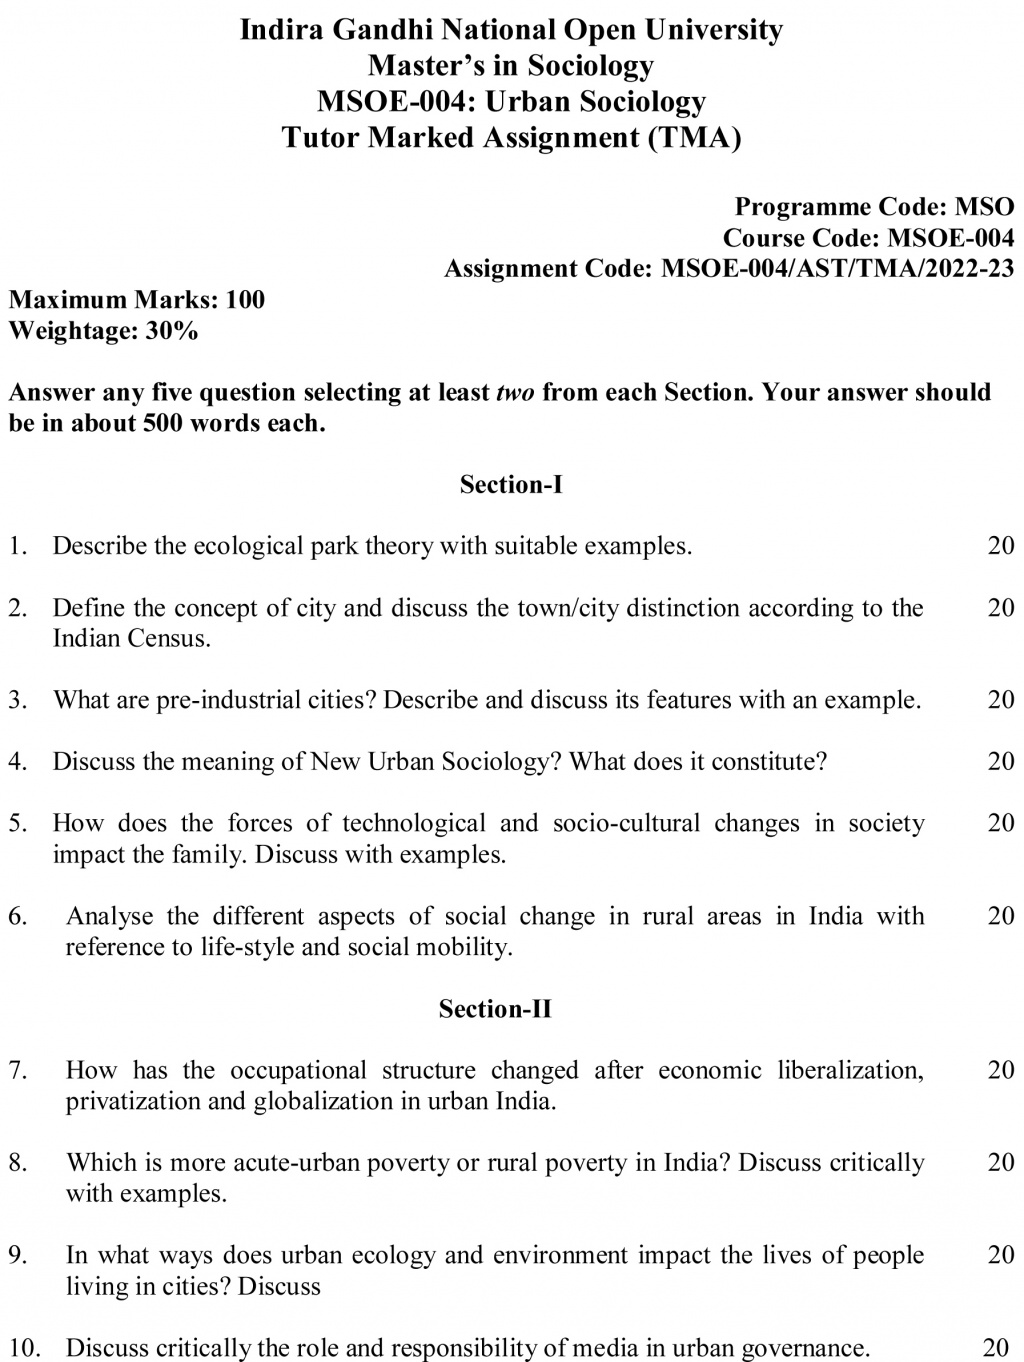 IGNOU MSOE-04 - Urban Sociology, Latest Solved Assignment-July 2022 – January 2023